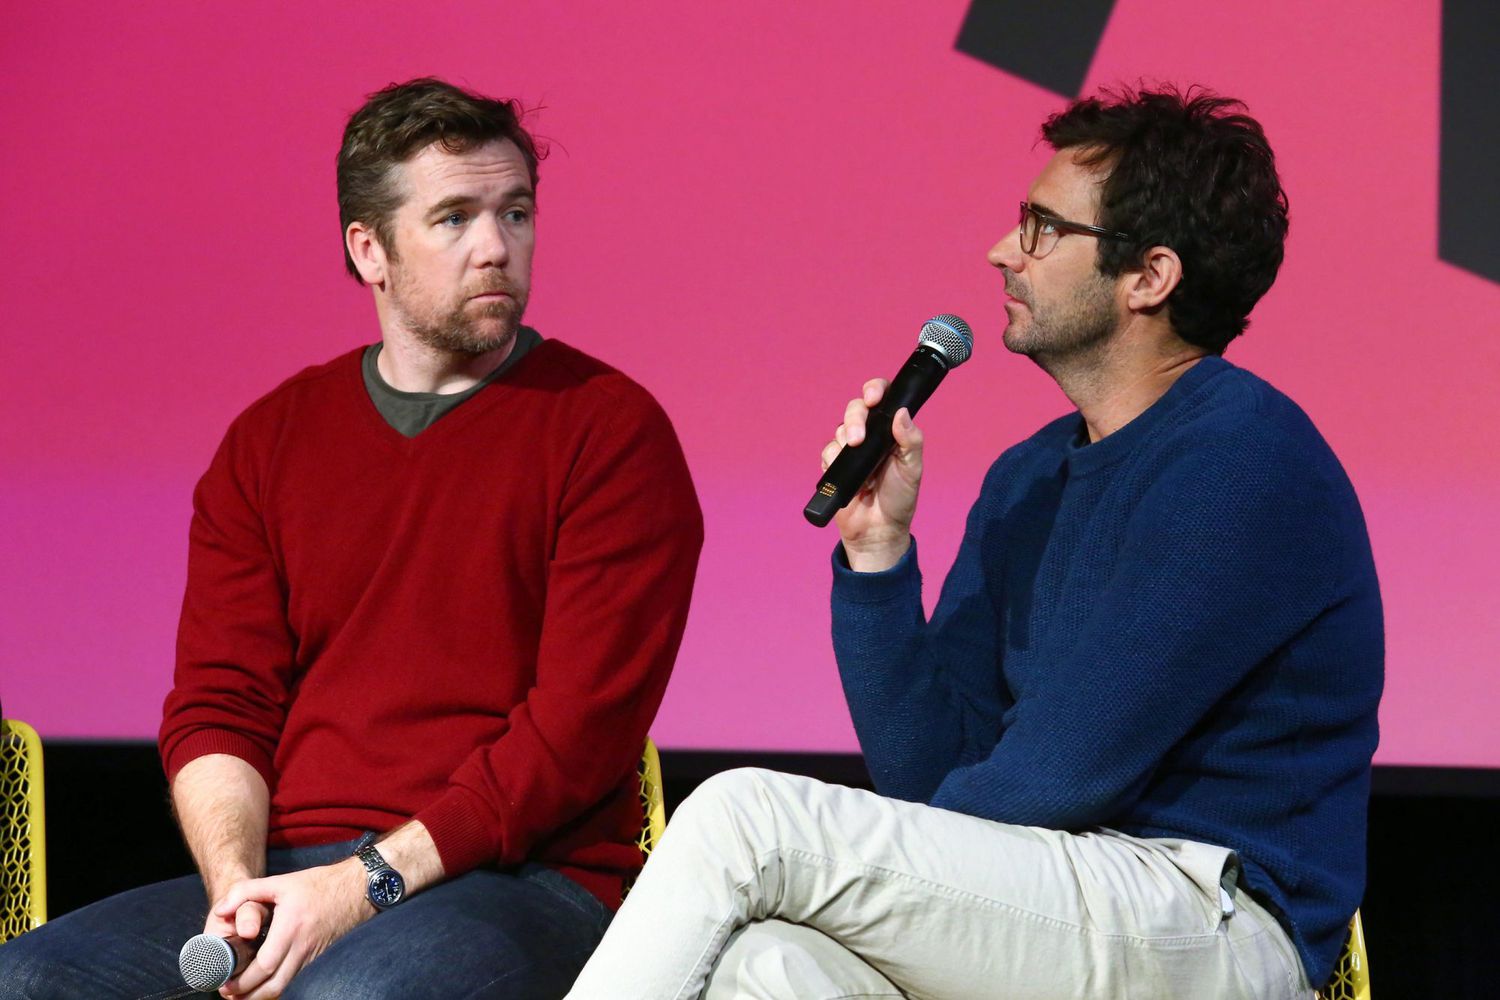 Patrick Brammall and Trent O'Donnell